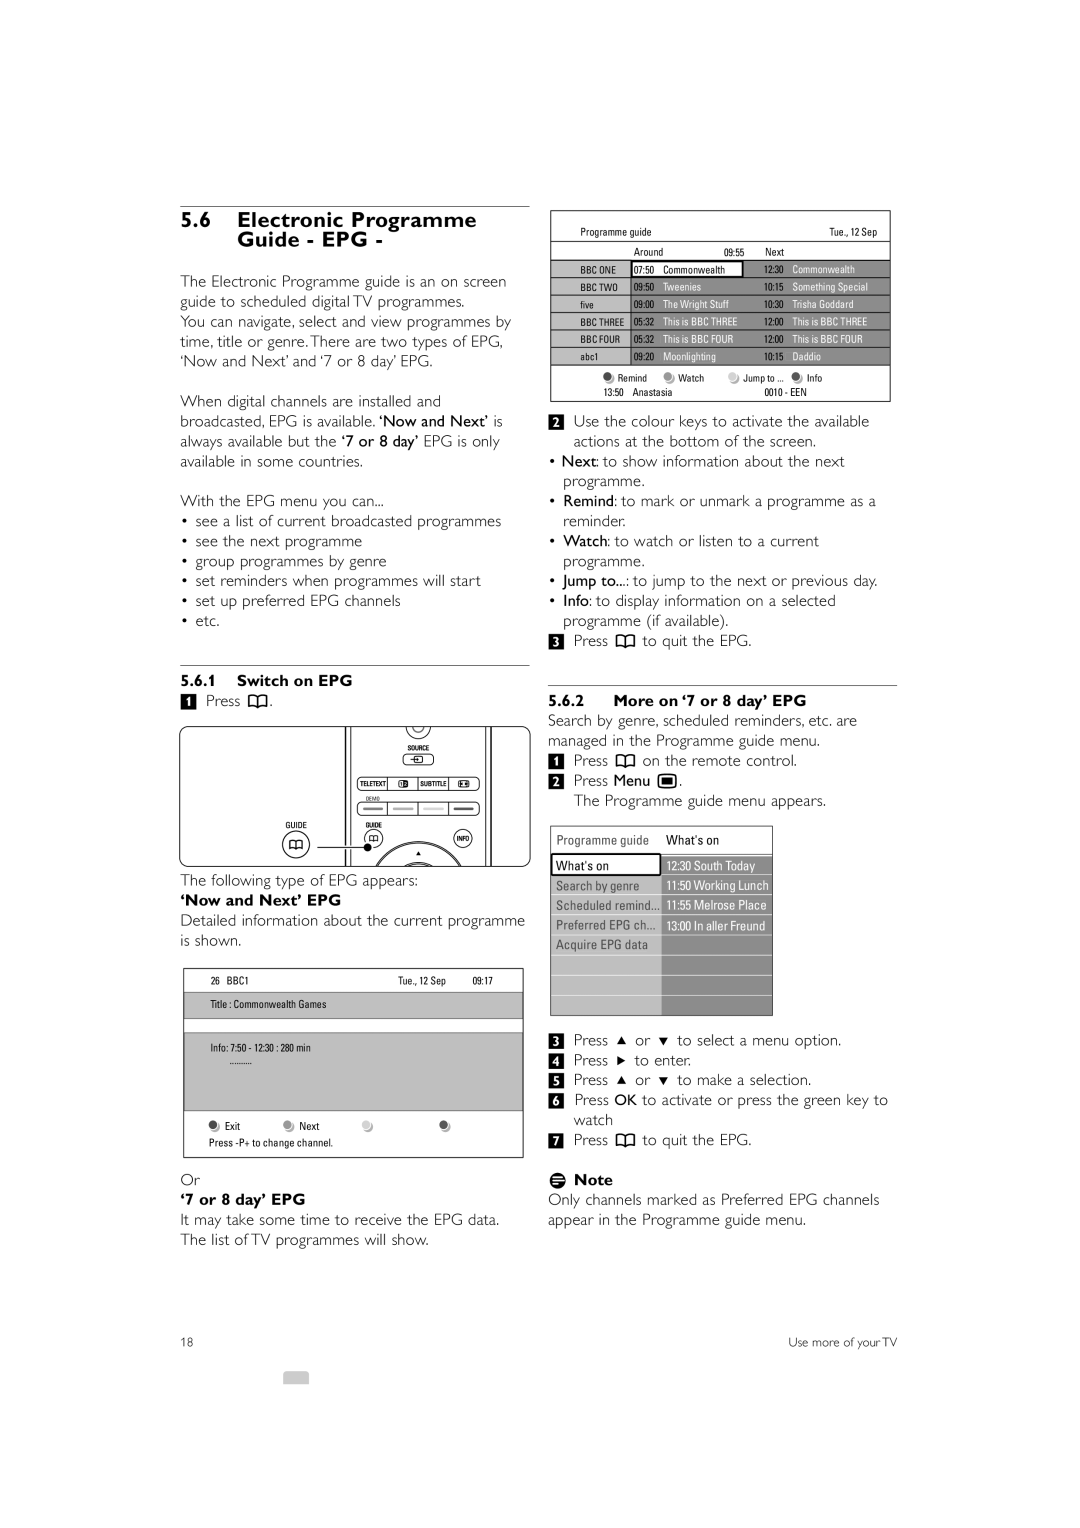 Philips 42PES0001D/H manual Electronic Programme Guide - EPG, Switch on EPG, ‘Now and Next’ EPG, ‘7 or 8 day’ EPG, rNote 